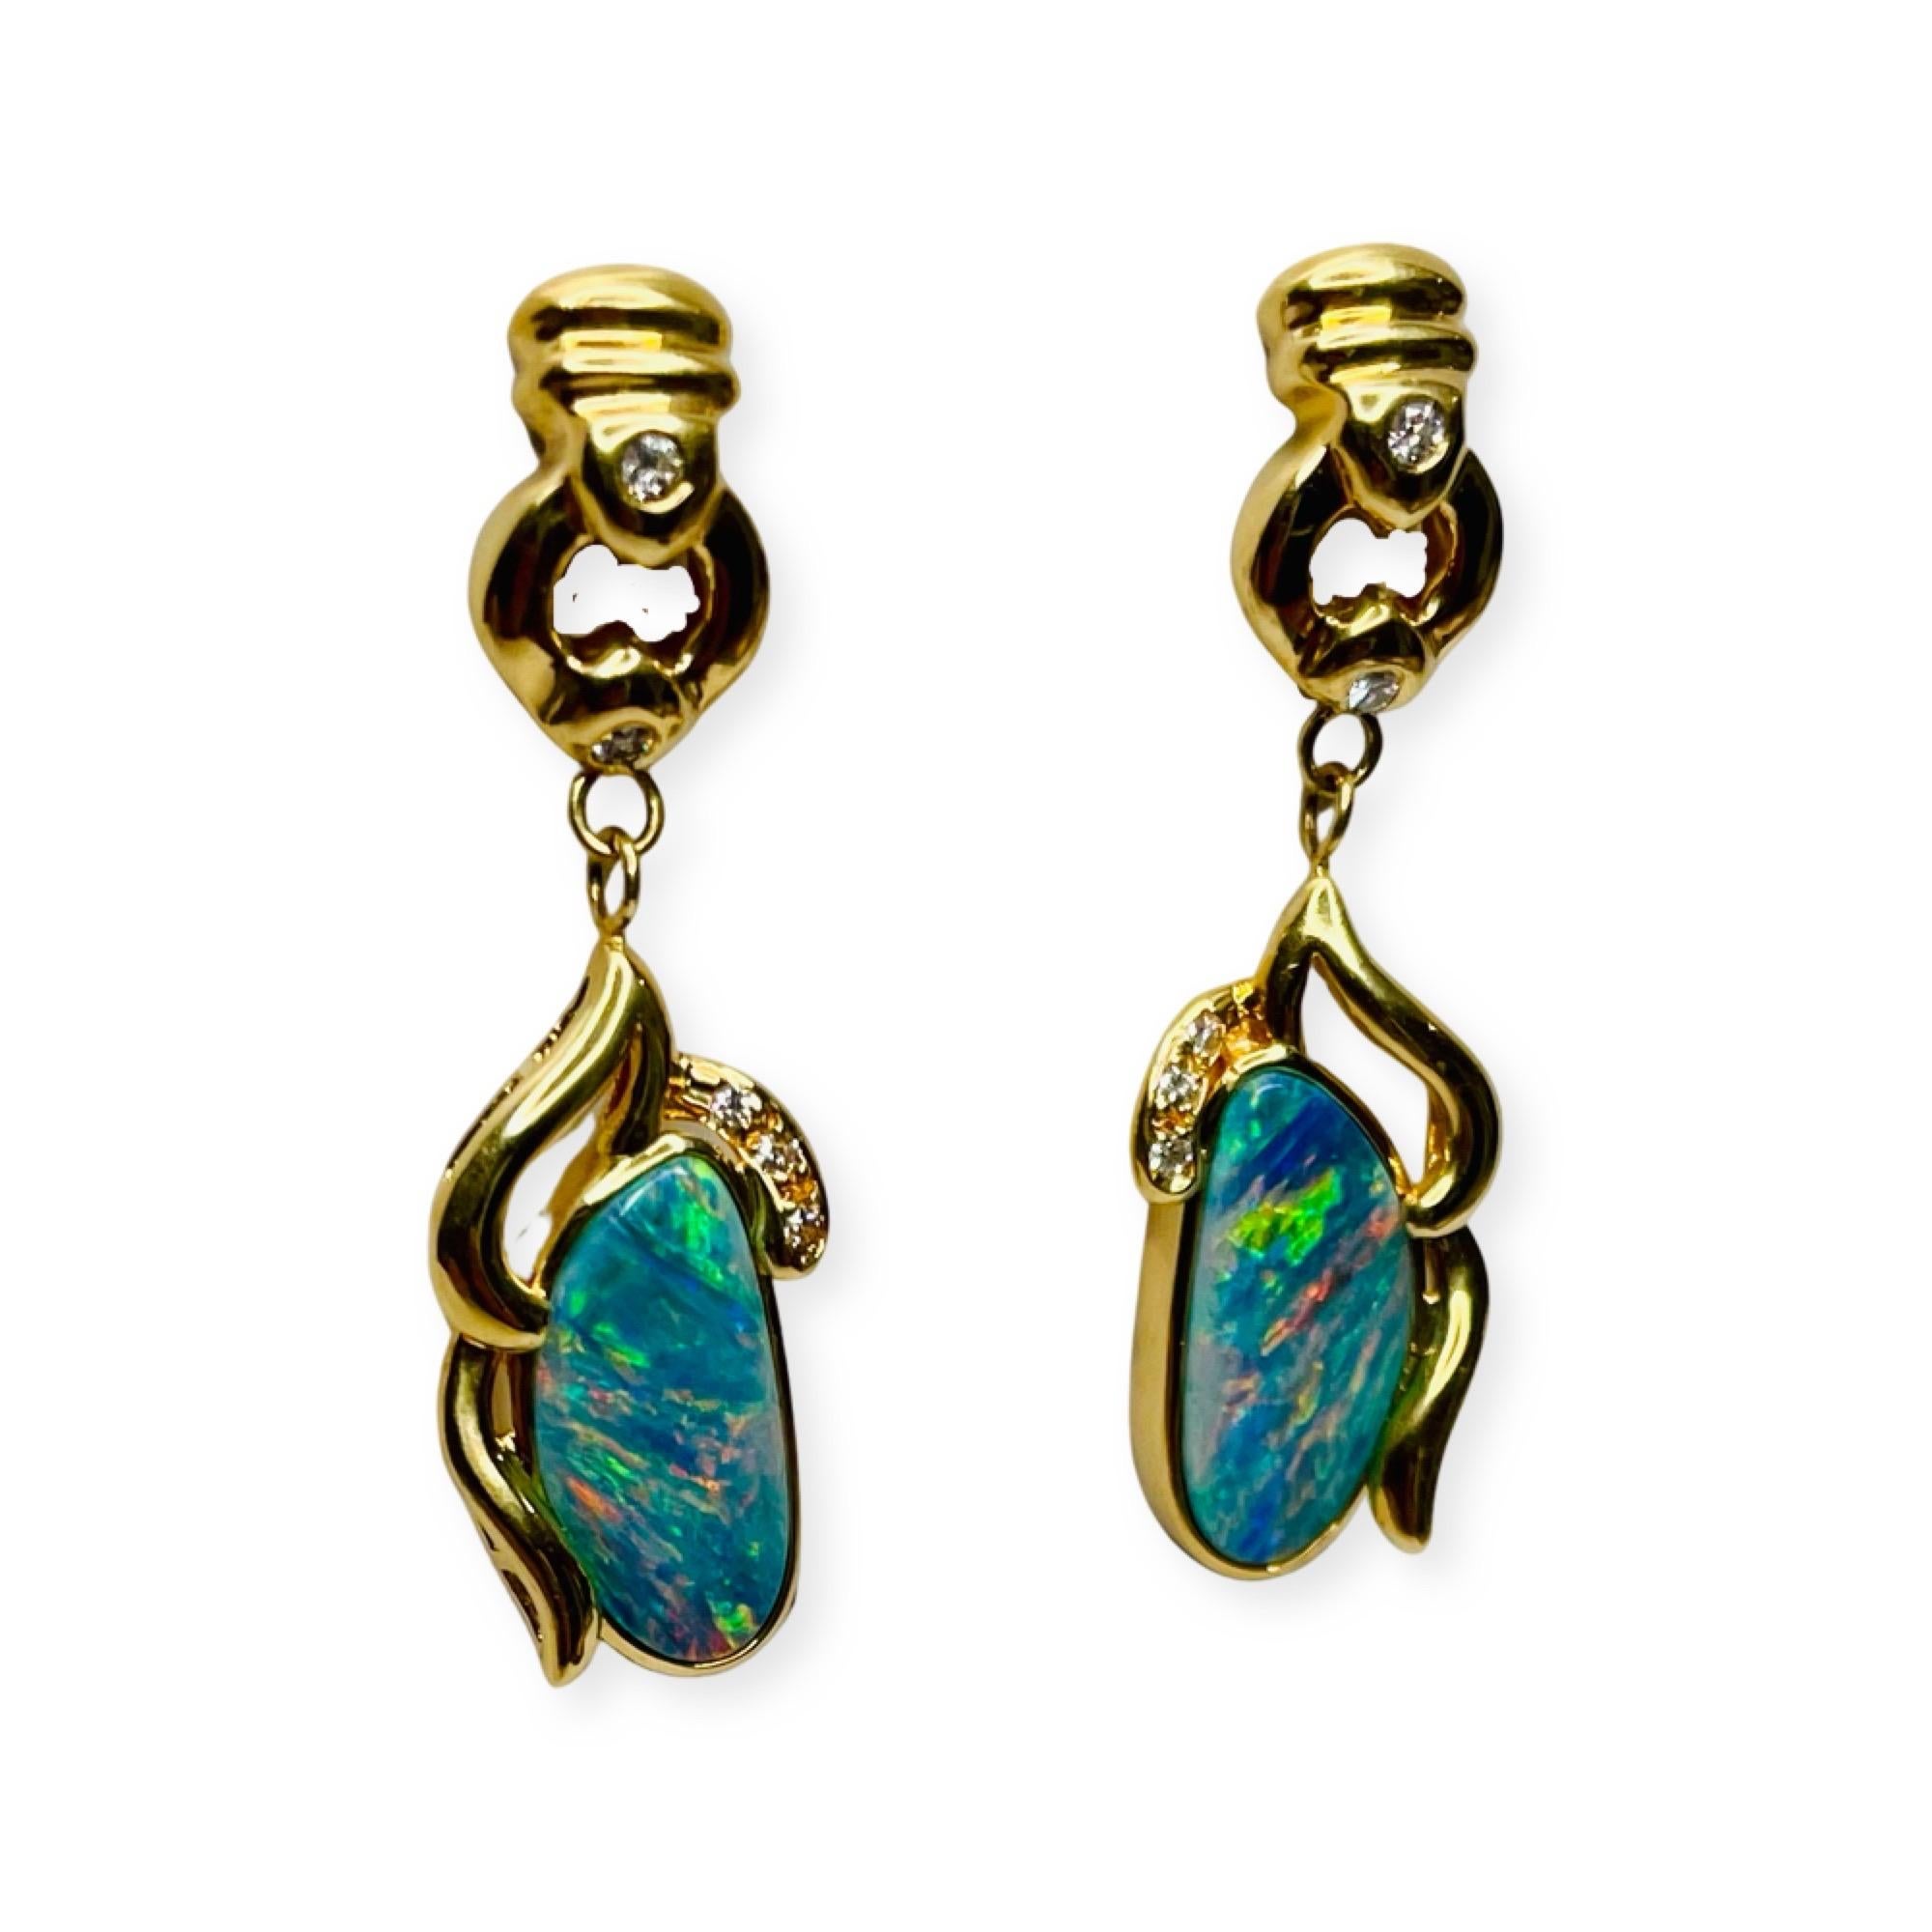 Okada 18K Yellow Gold Opal Doublet Diamond Earrings. There is a total opal doublet weight of 4.92 carats. They measure 21.0 mm x 12.0 mm. The opal is bezel set. There are 6 full cut round brilliant diamonds of SI clarity and GH color. There are 3